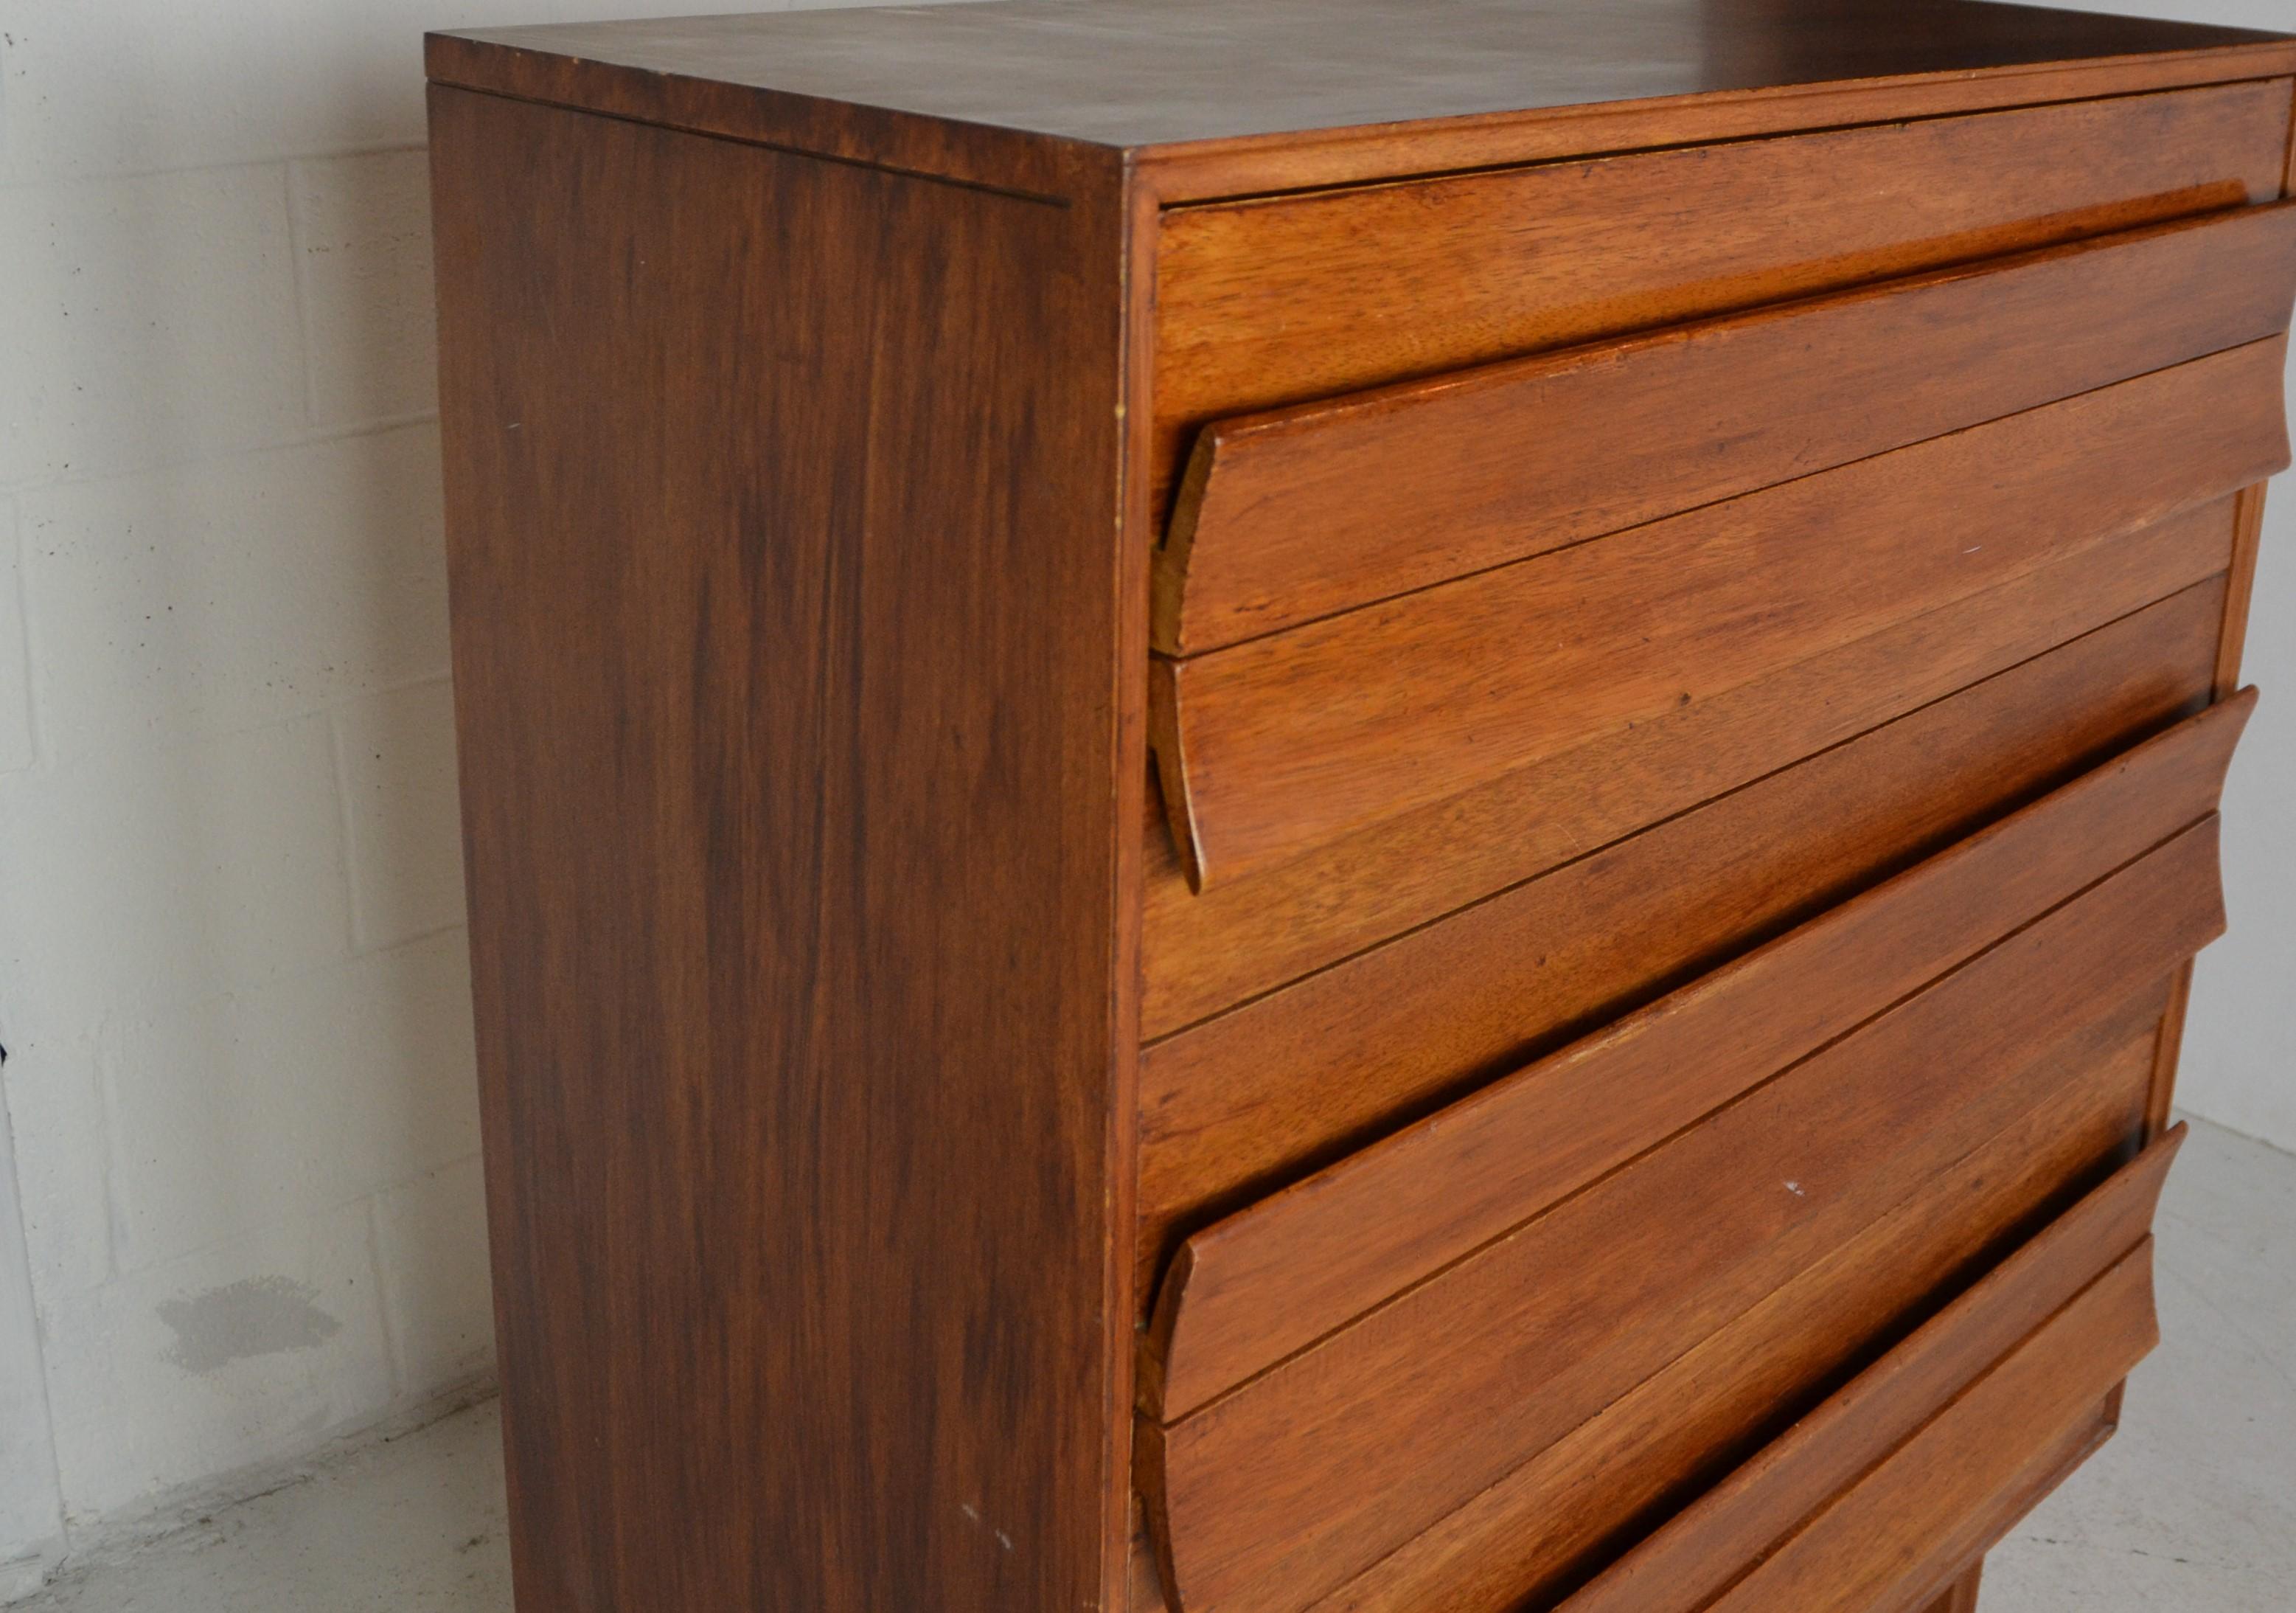 A midcentury chest of drawers designed by Paul Laszlo for Brown Saltman and manufactured in the United States, circa 1950s. Mahogany frame with a geometric base. Unique sculpted fin-like pulls on the six dovetailed drawers.